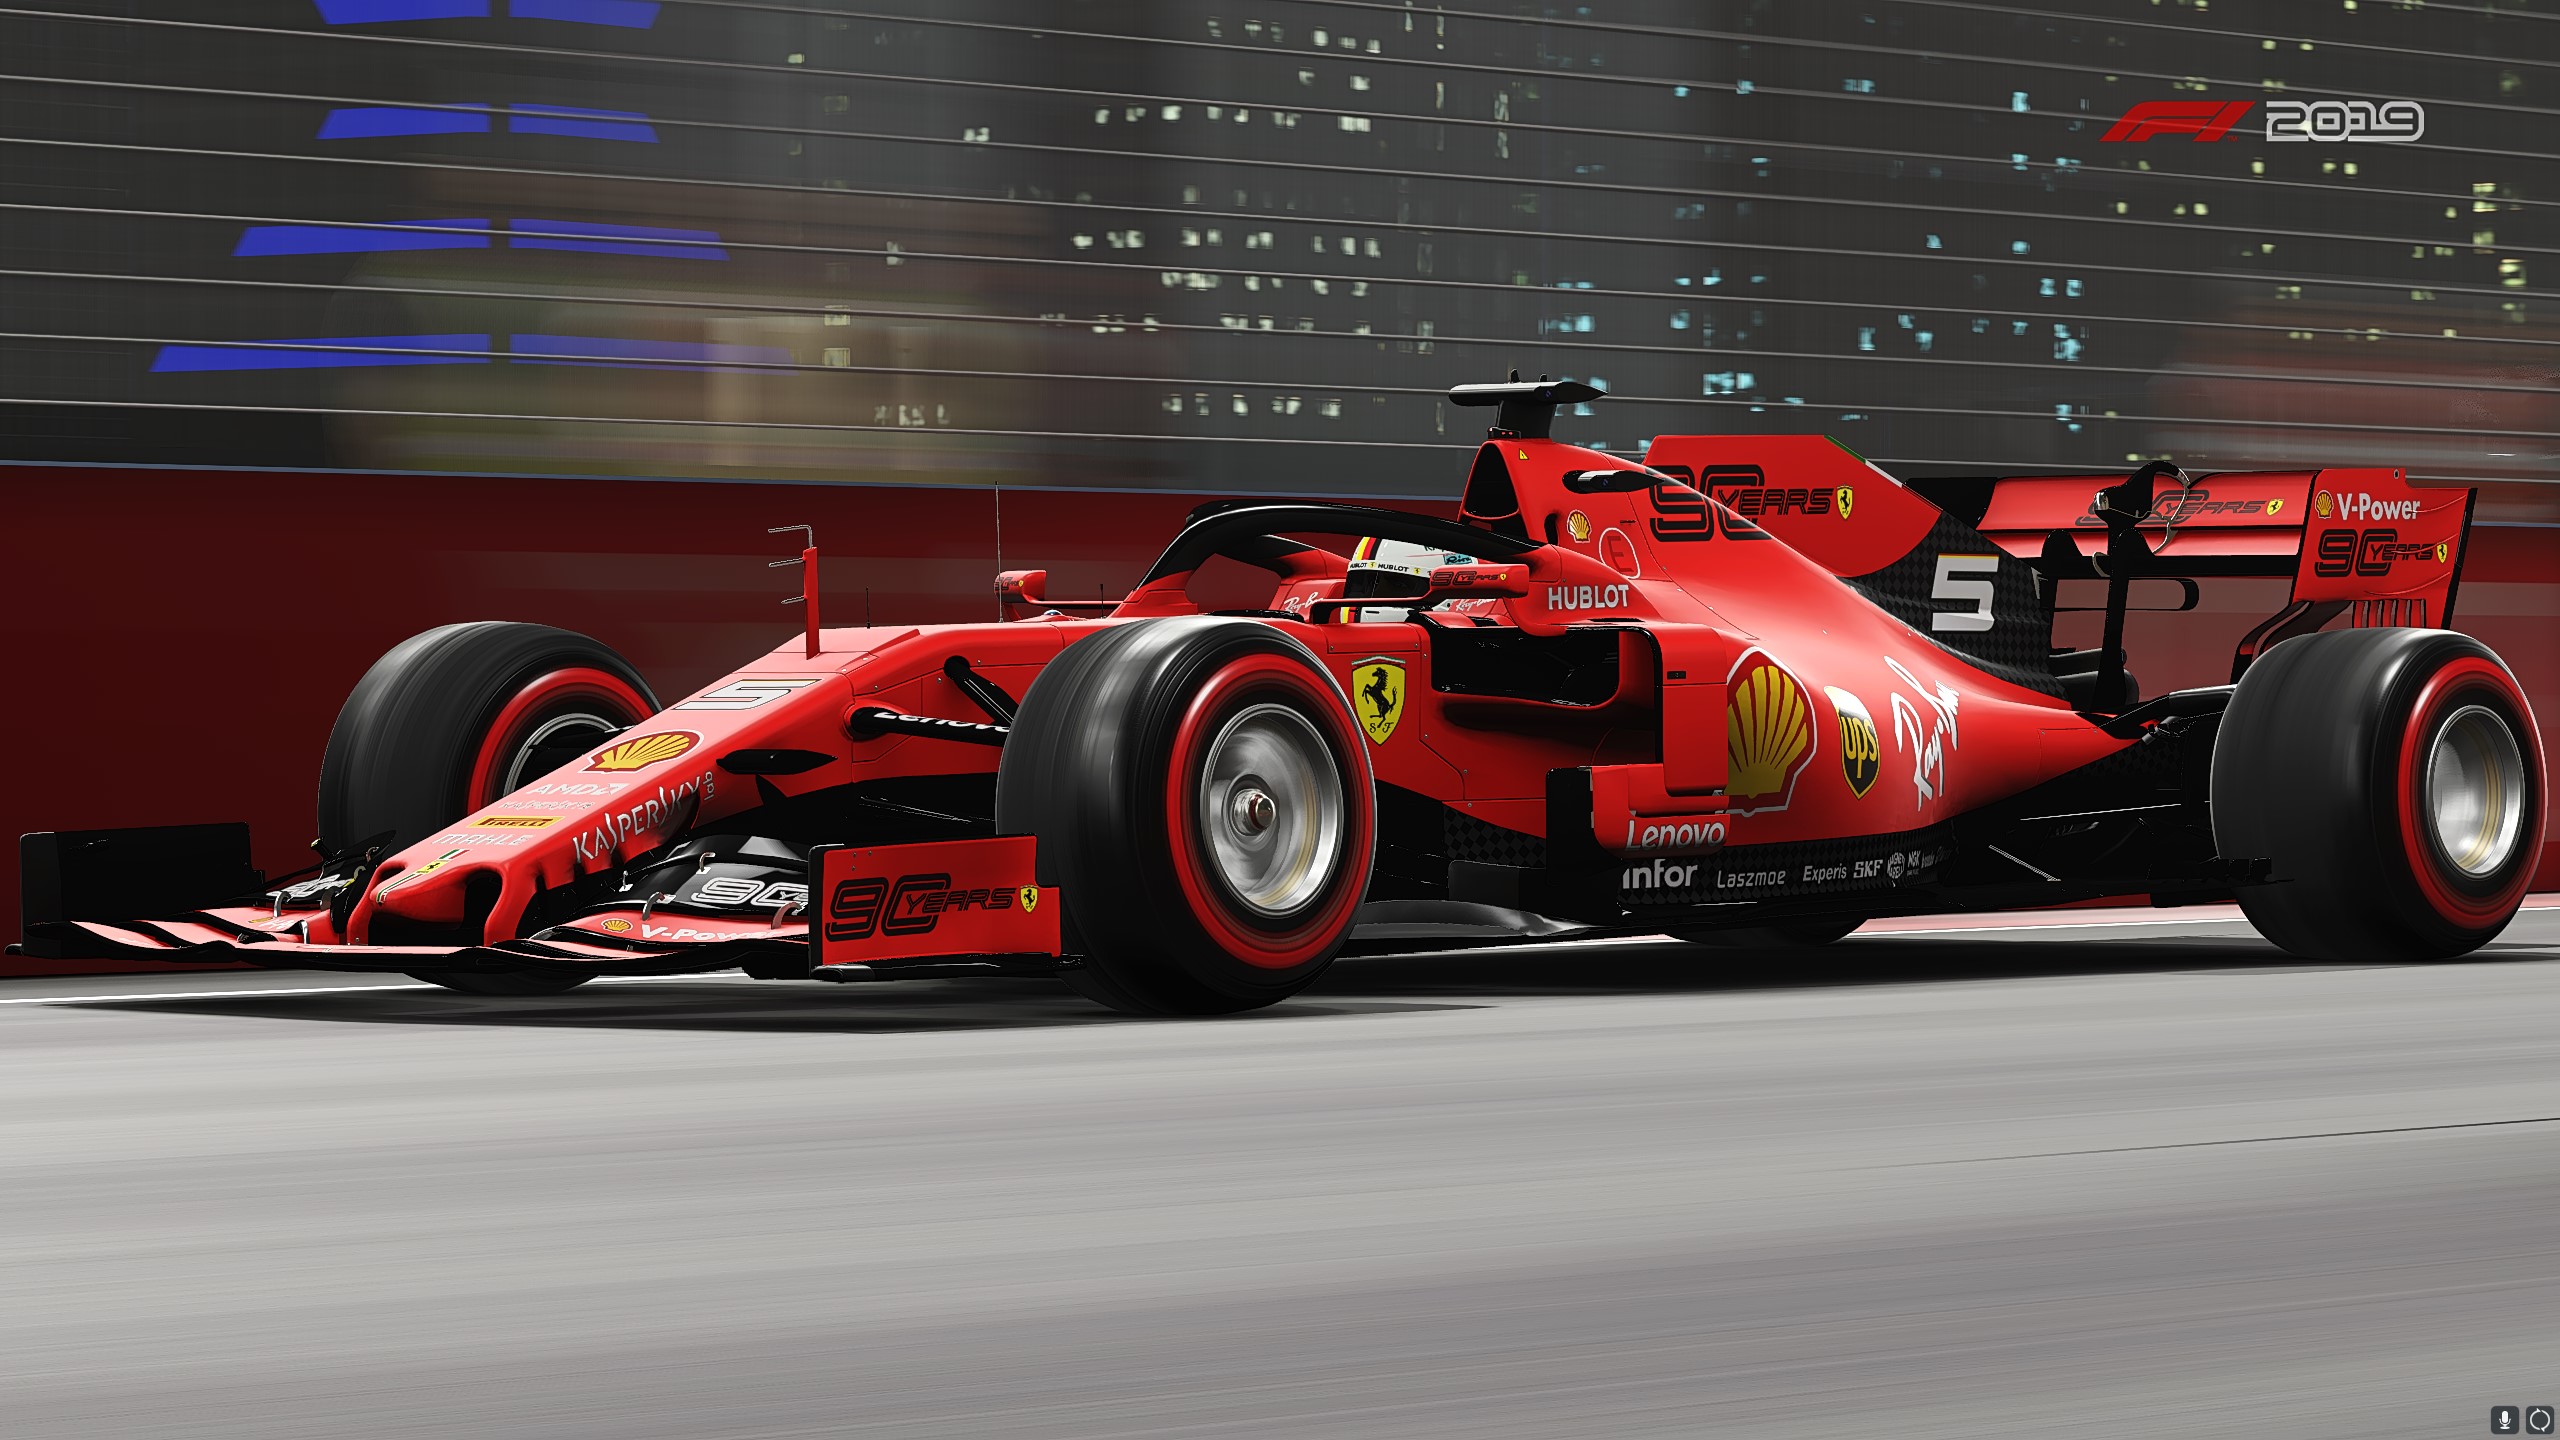 Video Game F1 2019 HD Wallpaper | Background Image